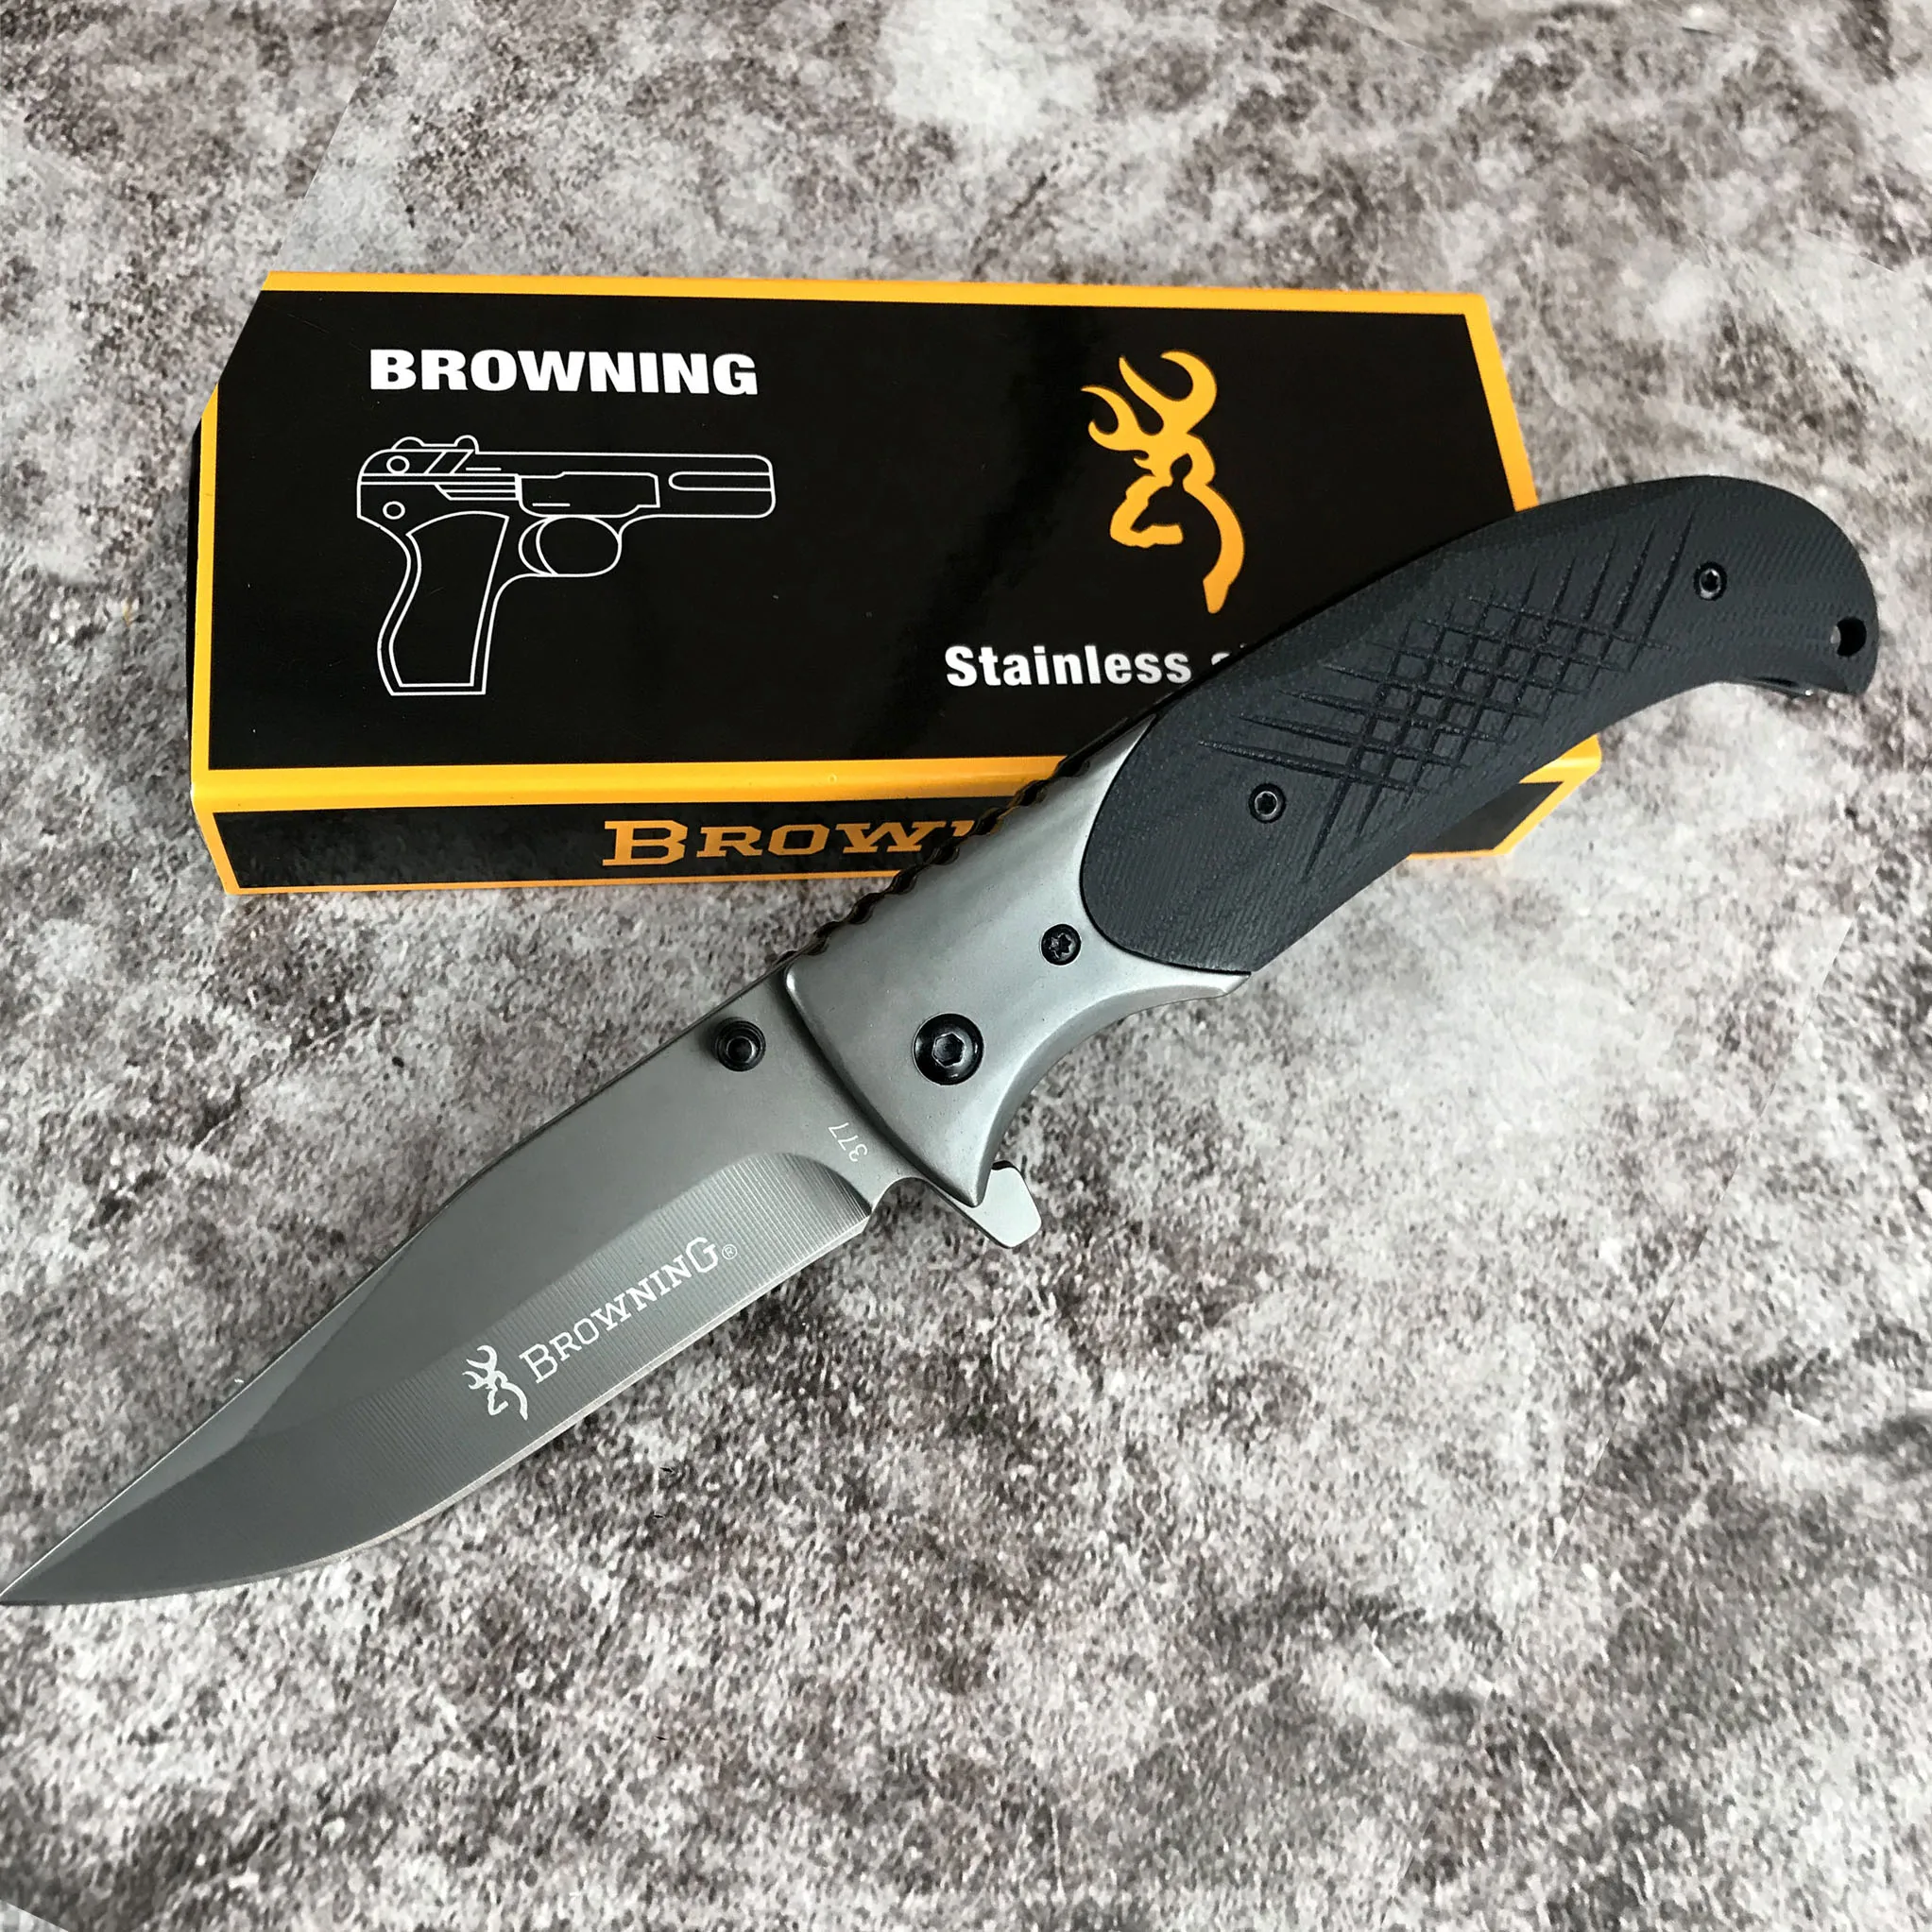 

Browning 377 Folding Blade Knife G10 Military Combat Outdoor Camping Hunting Survival Tactical Utility Pocket EDC Multi Knives